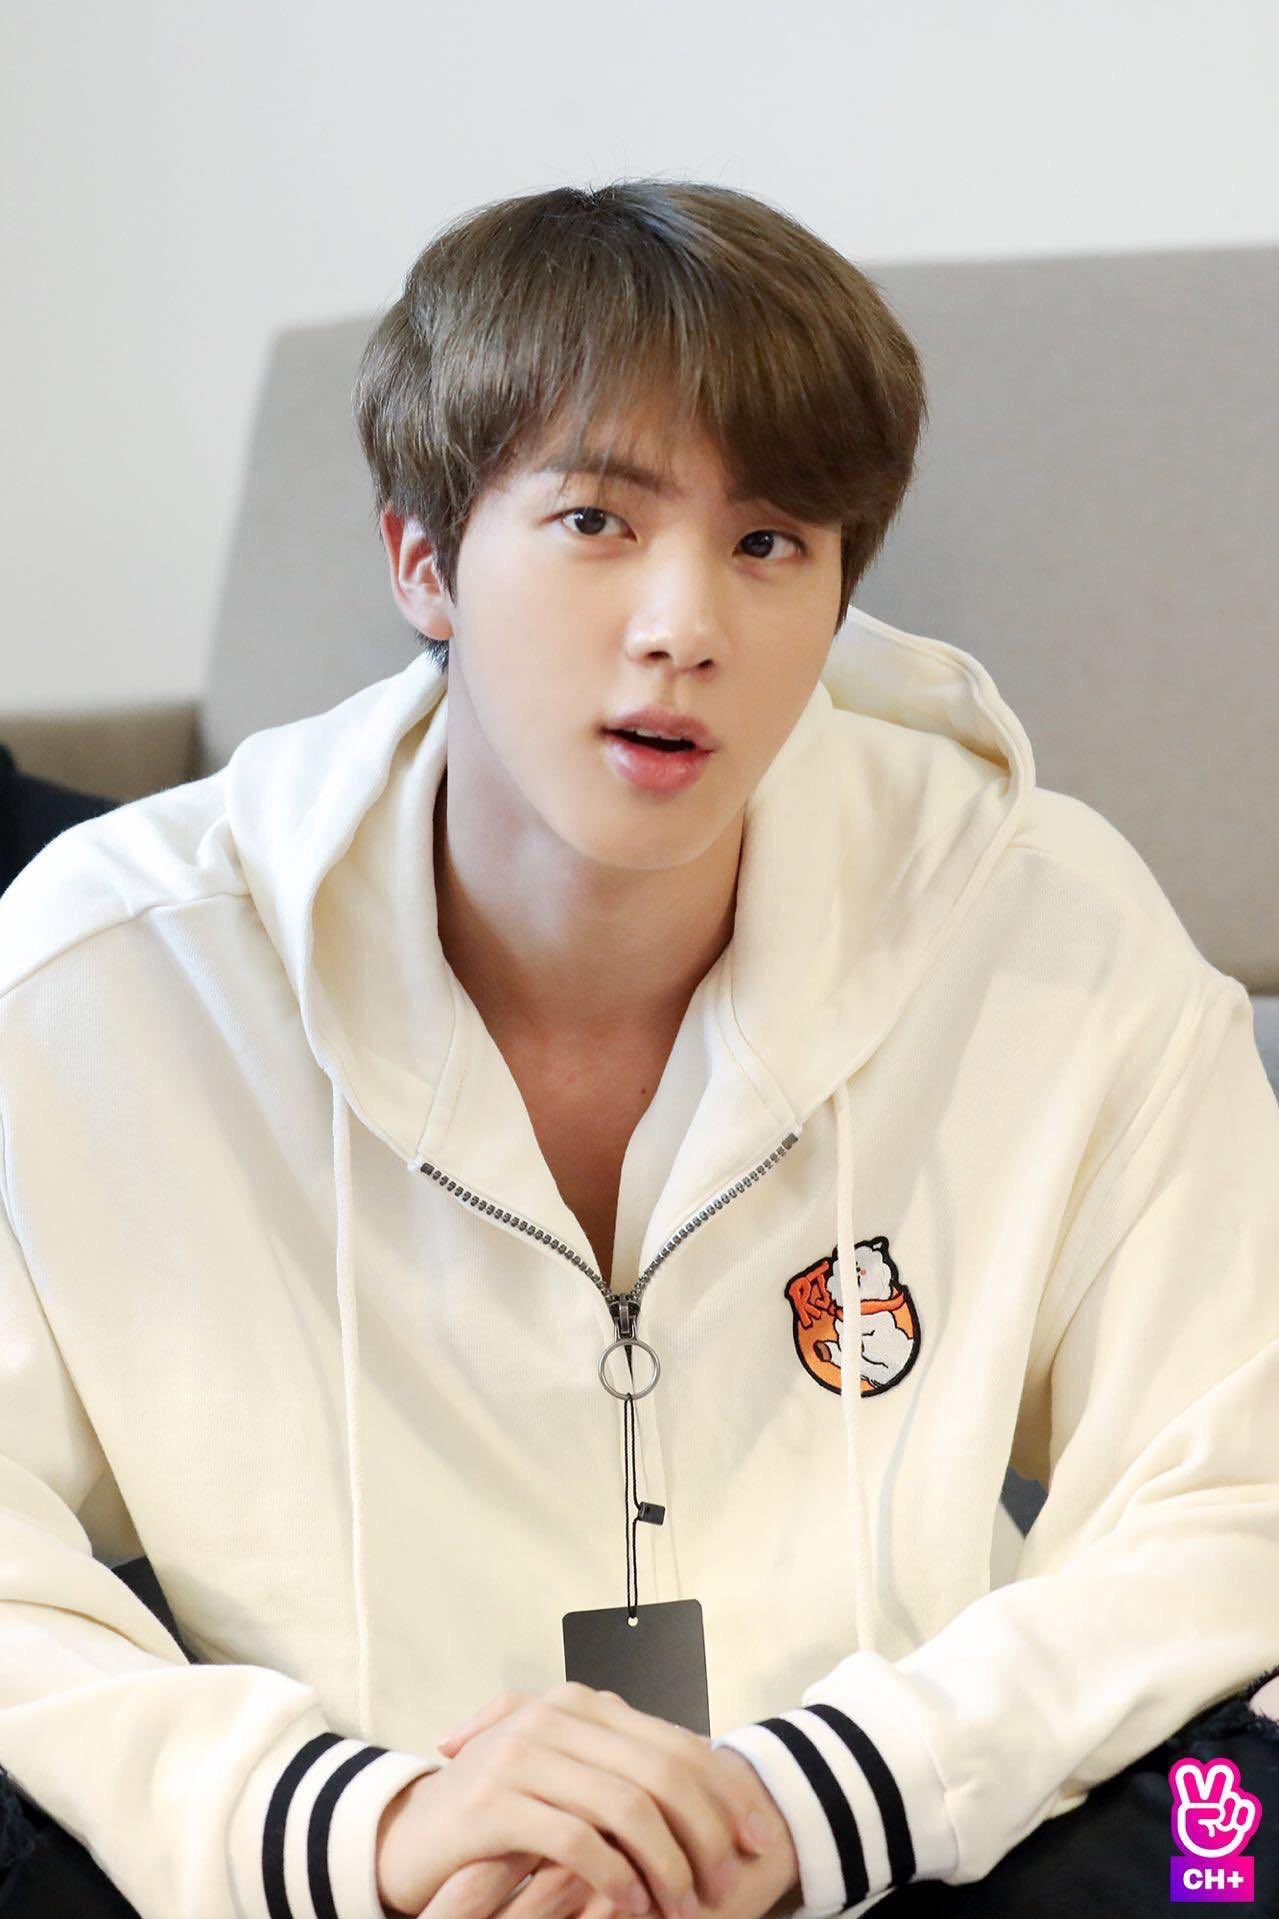 All for Jin on X: [📸#JinUpdate] RUN BTS! 2019 - Ep.68 Behind the